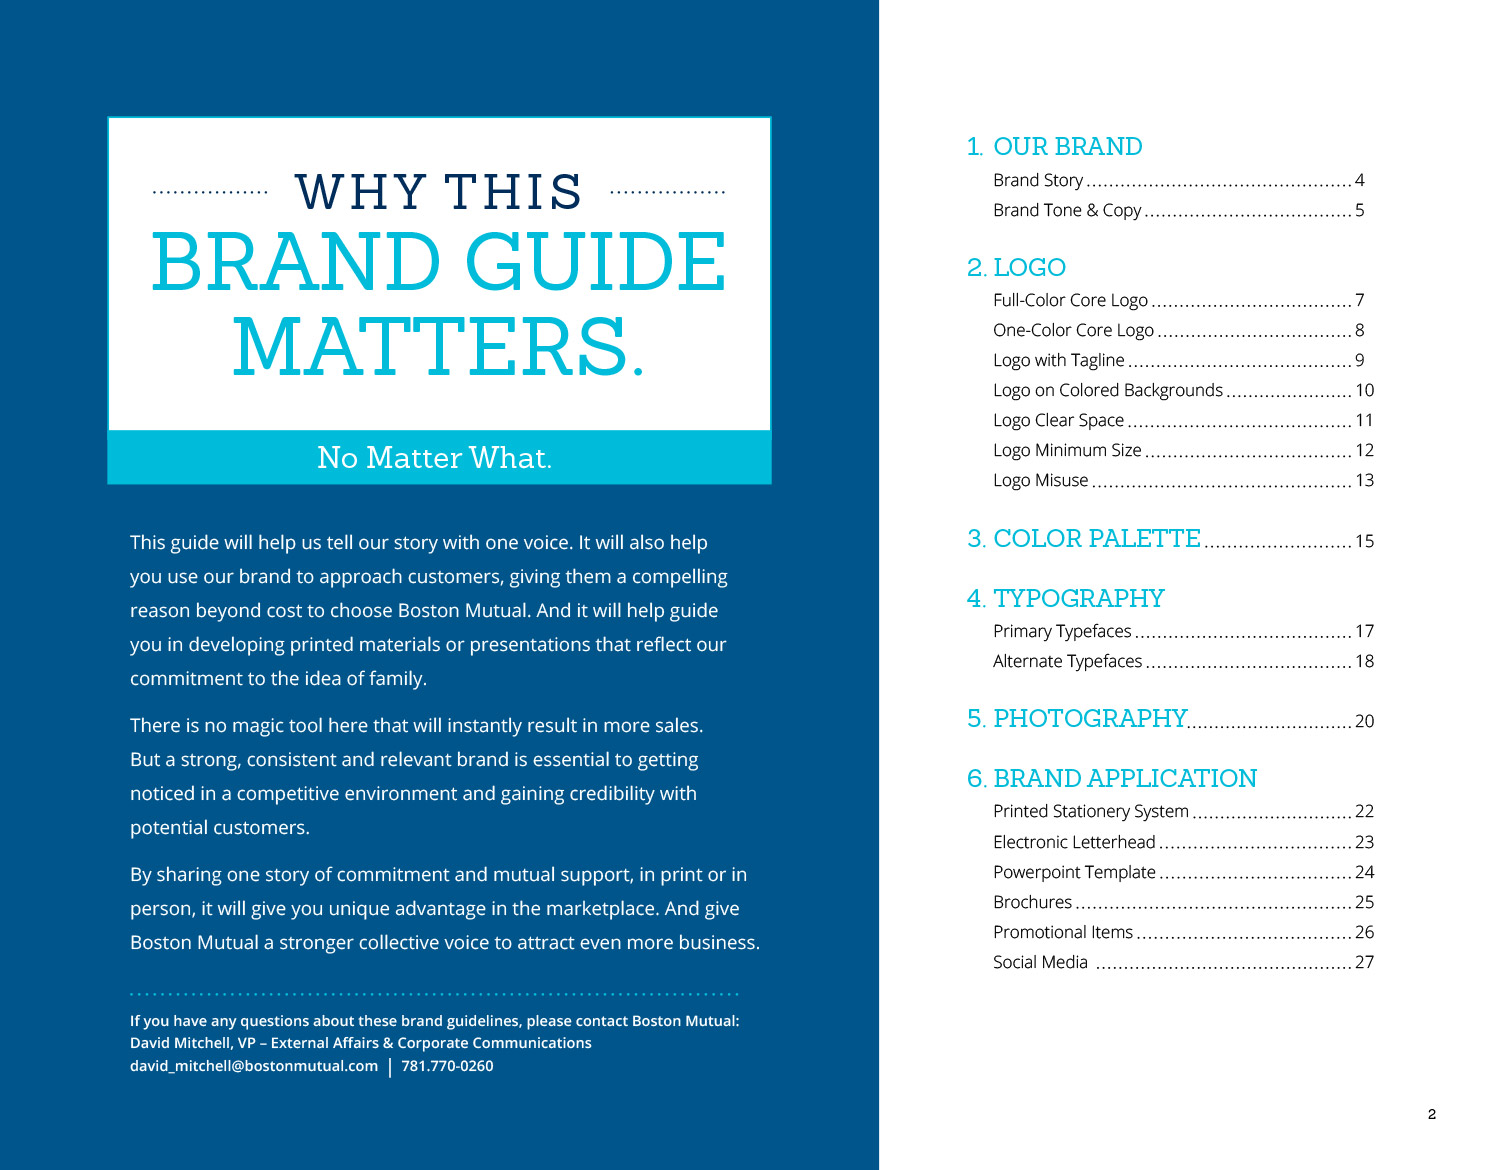 boston mutual brand guide page showing table of contents